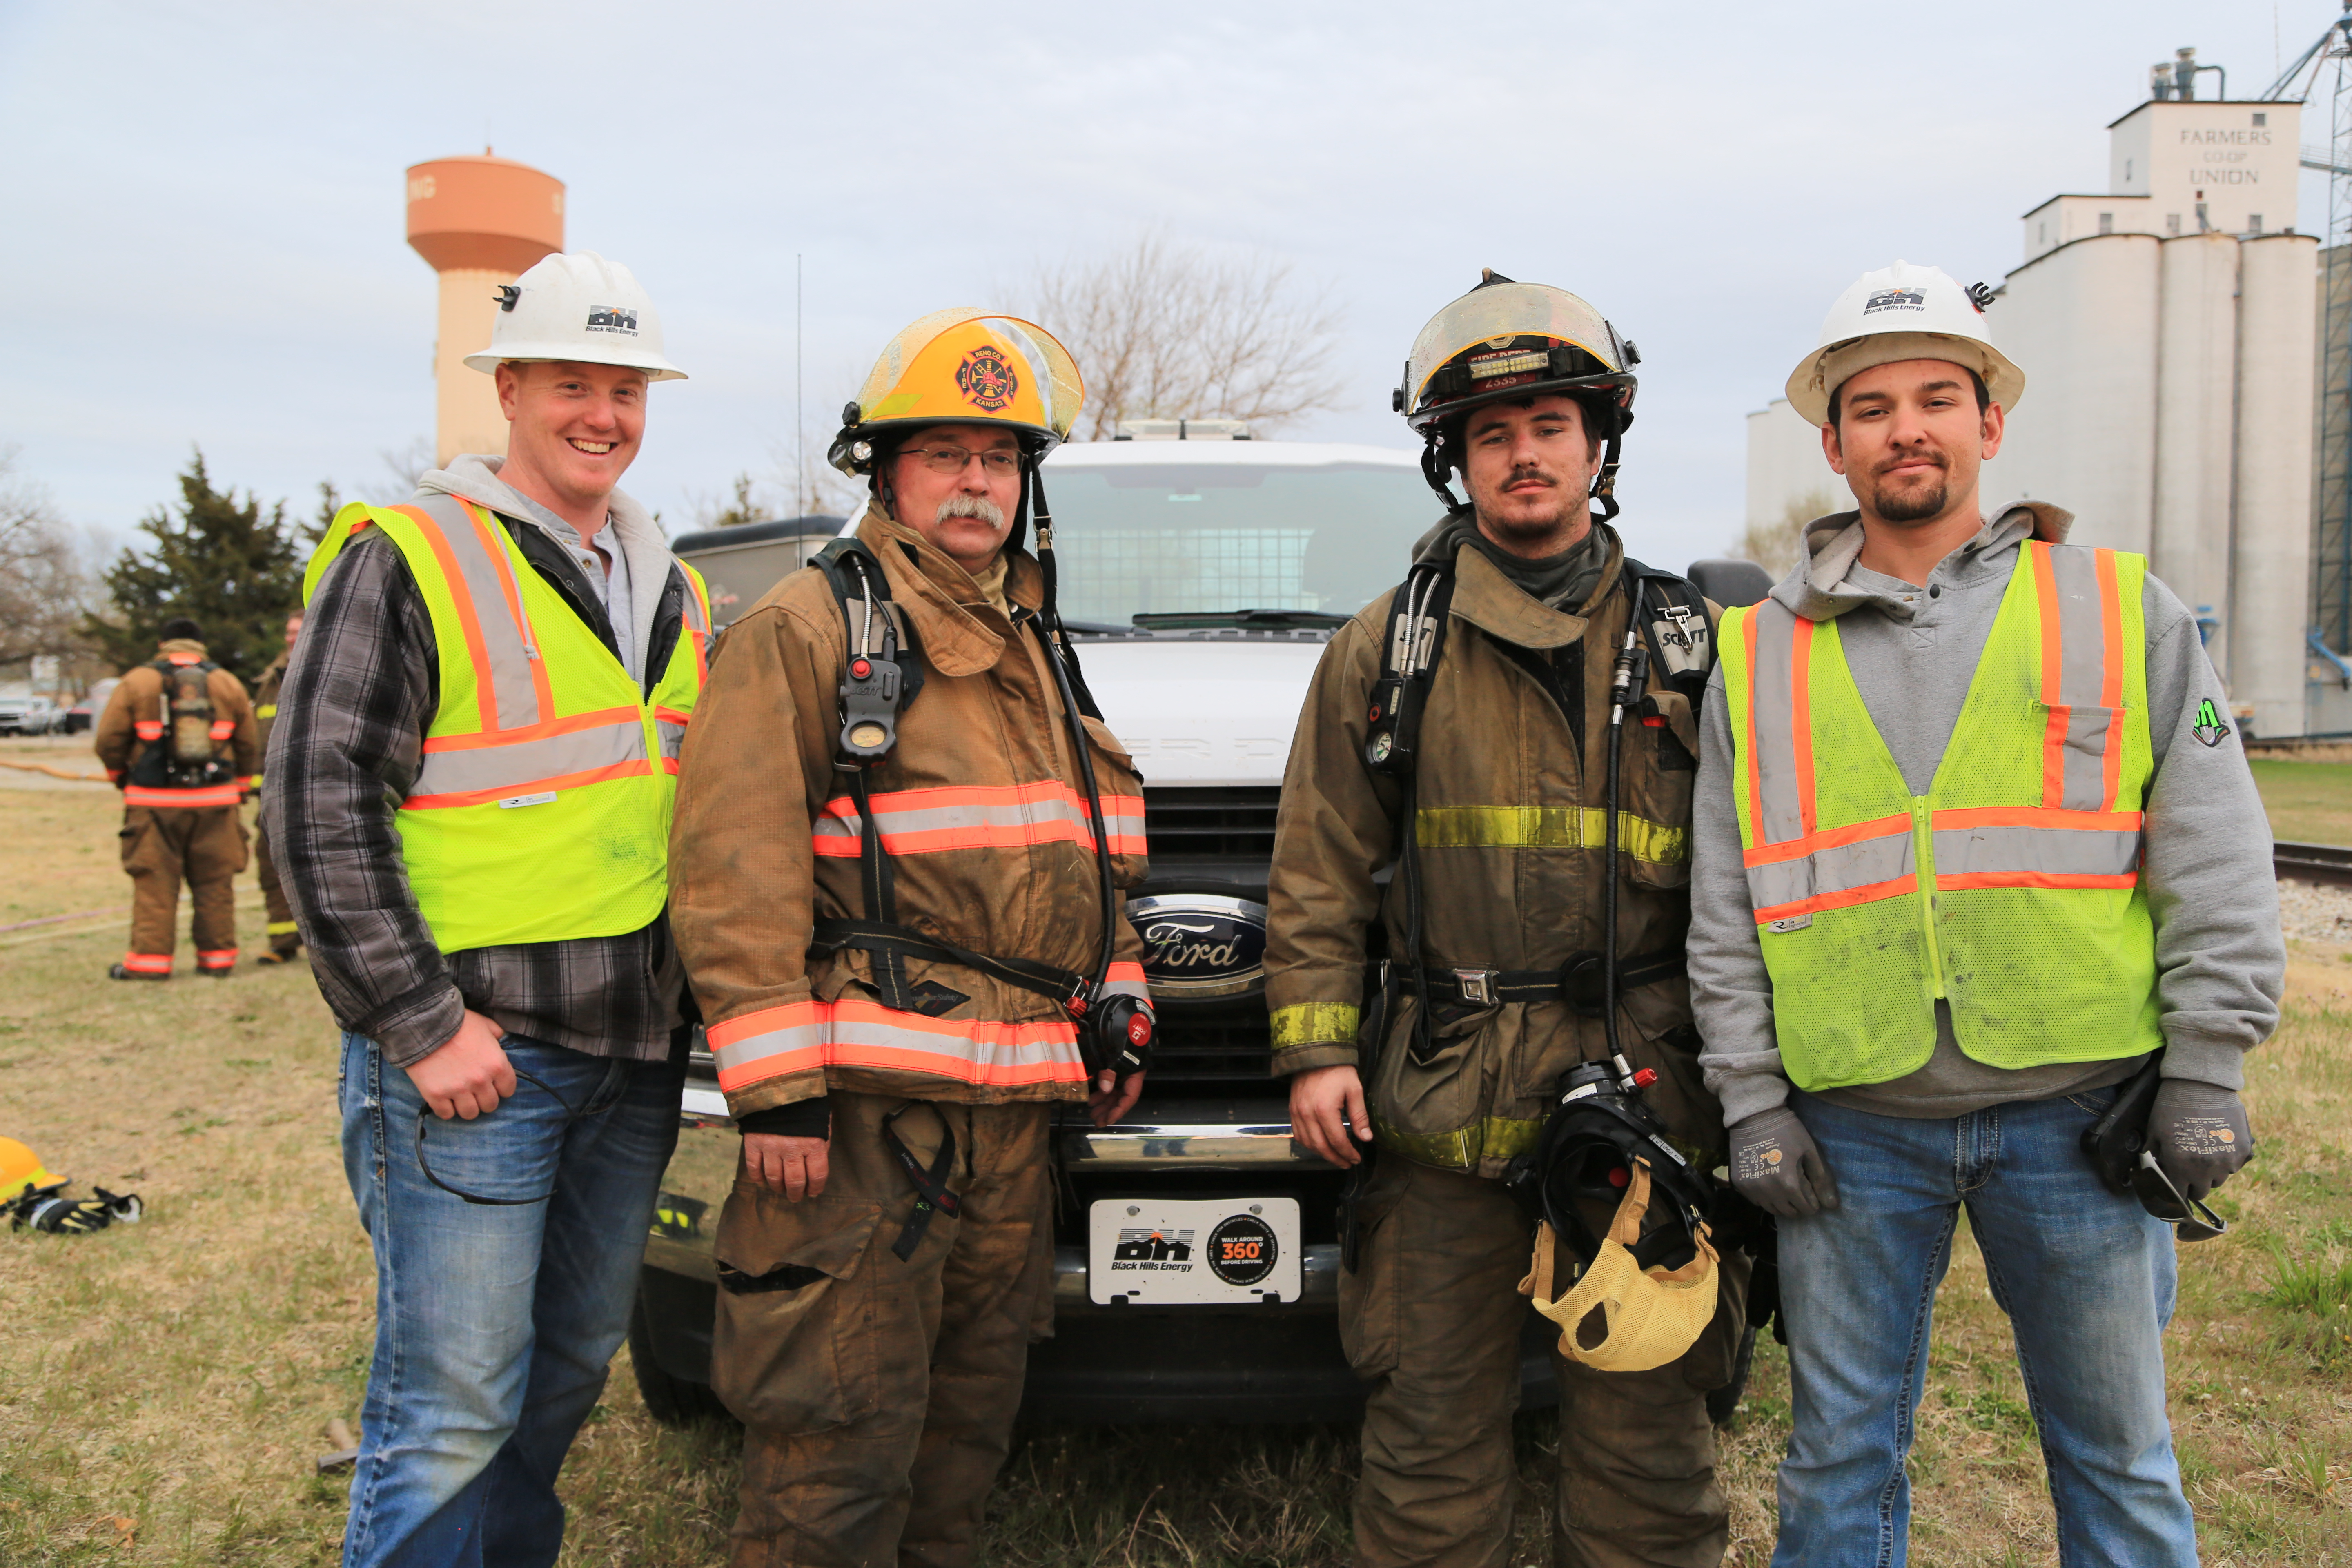 Black Hills Energy to Conduct Fire Safety Training for Southwest Kansas Firefighters